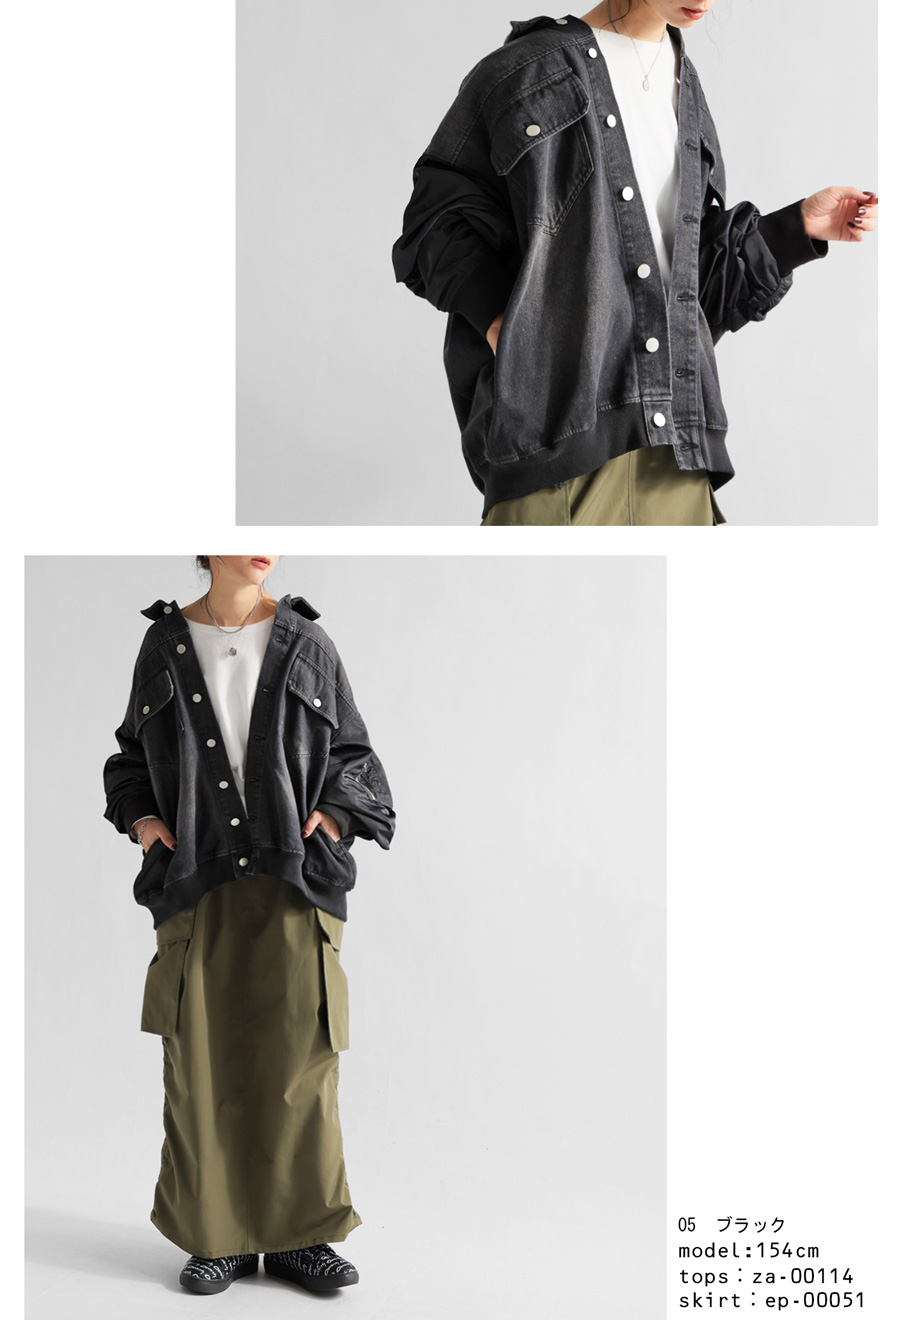 do King jacket jacket lady's outer free shipping *4 month 14 day 10 hour ~ repeated .. new color appearance mail service un- possible 